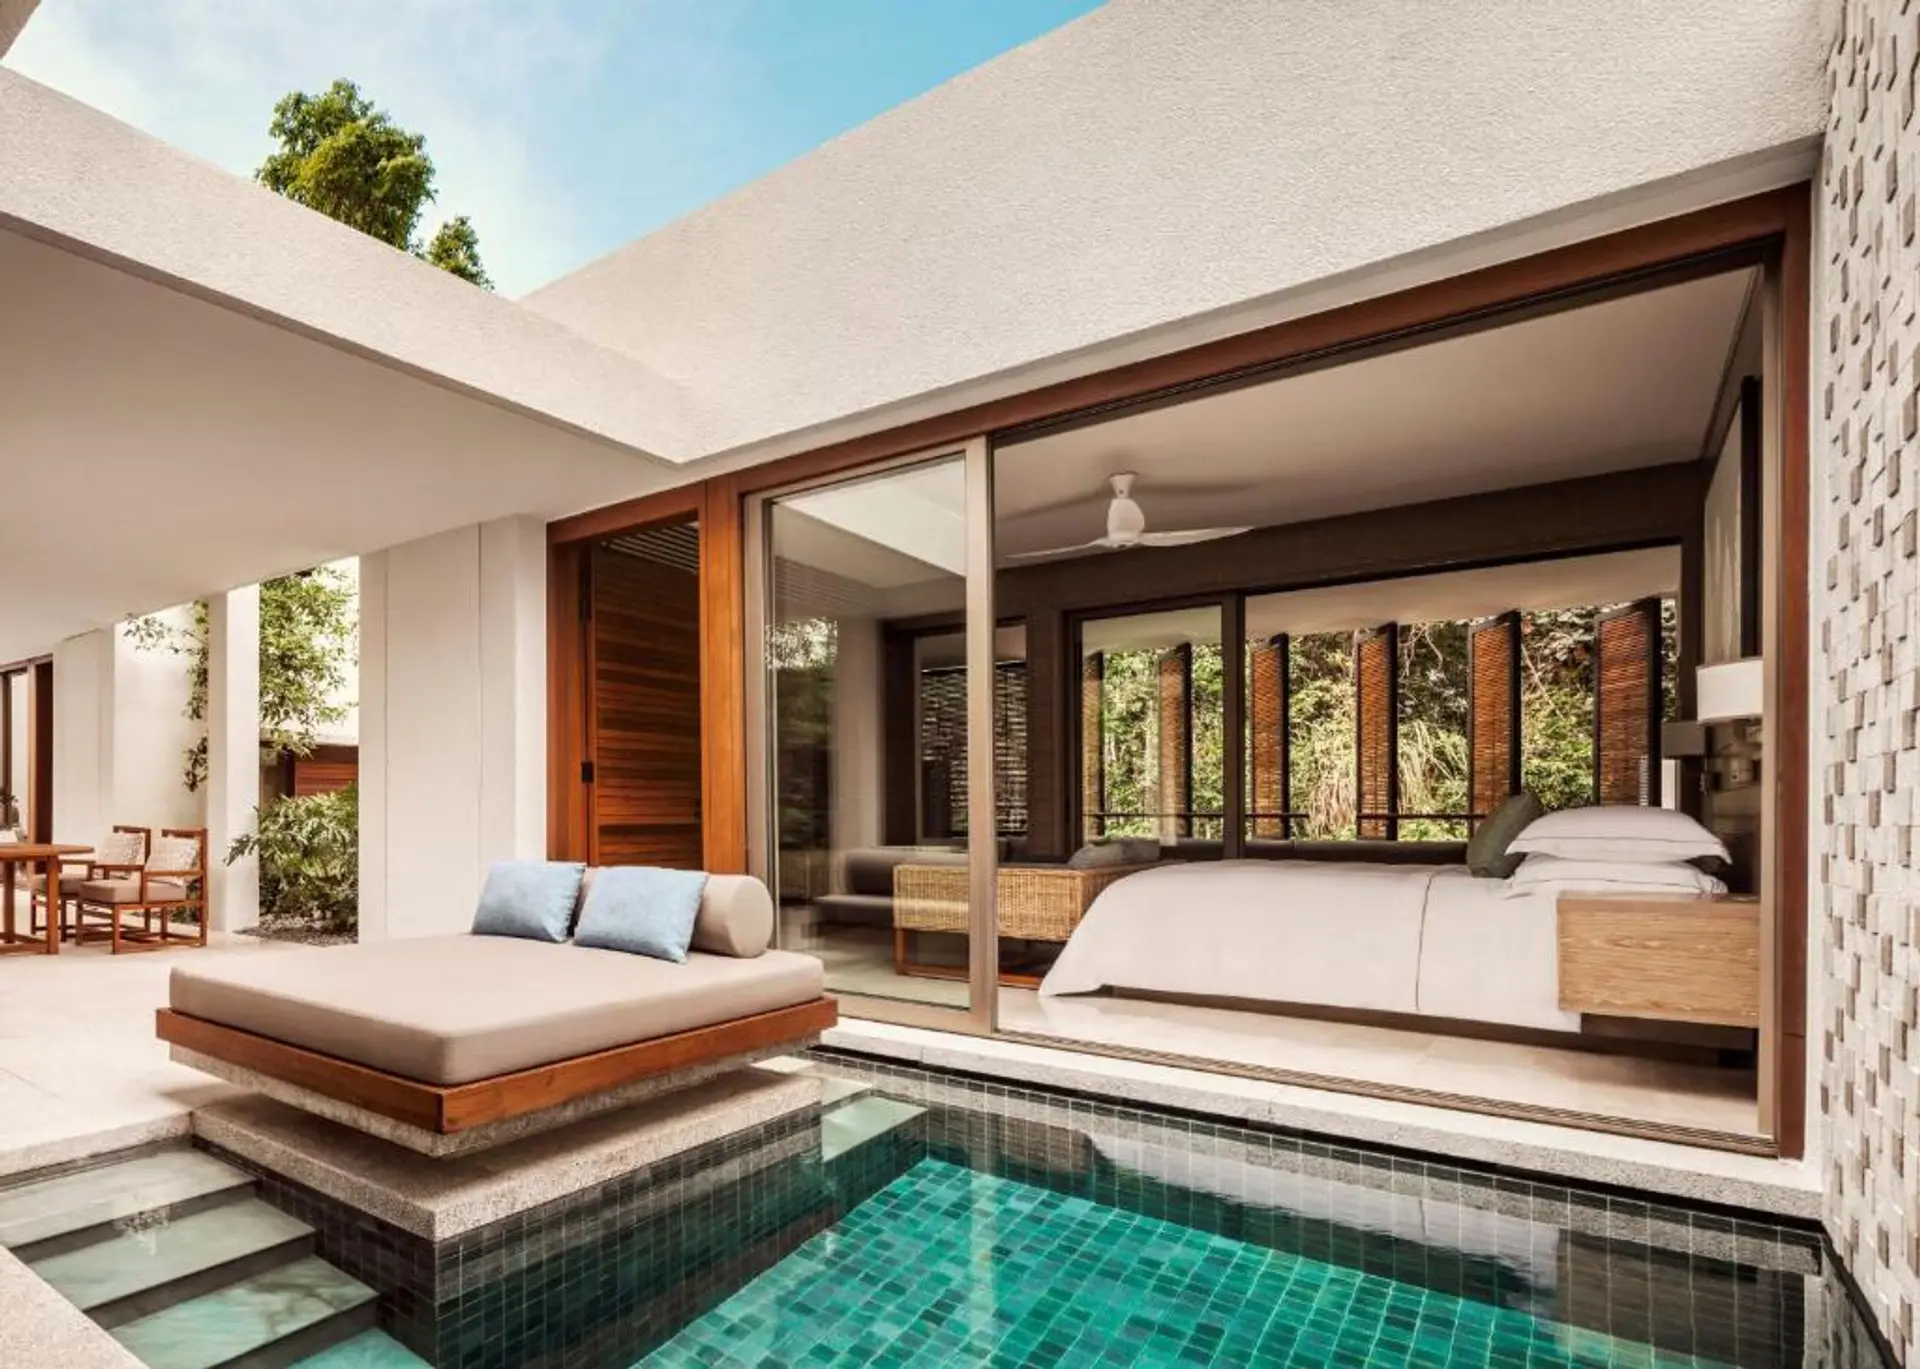 Hotels News - One & Only's first resort in Southeast Asia has opened